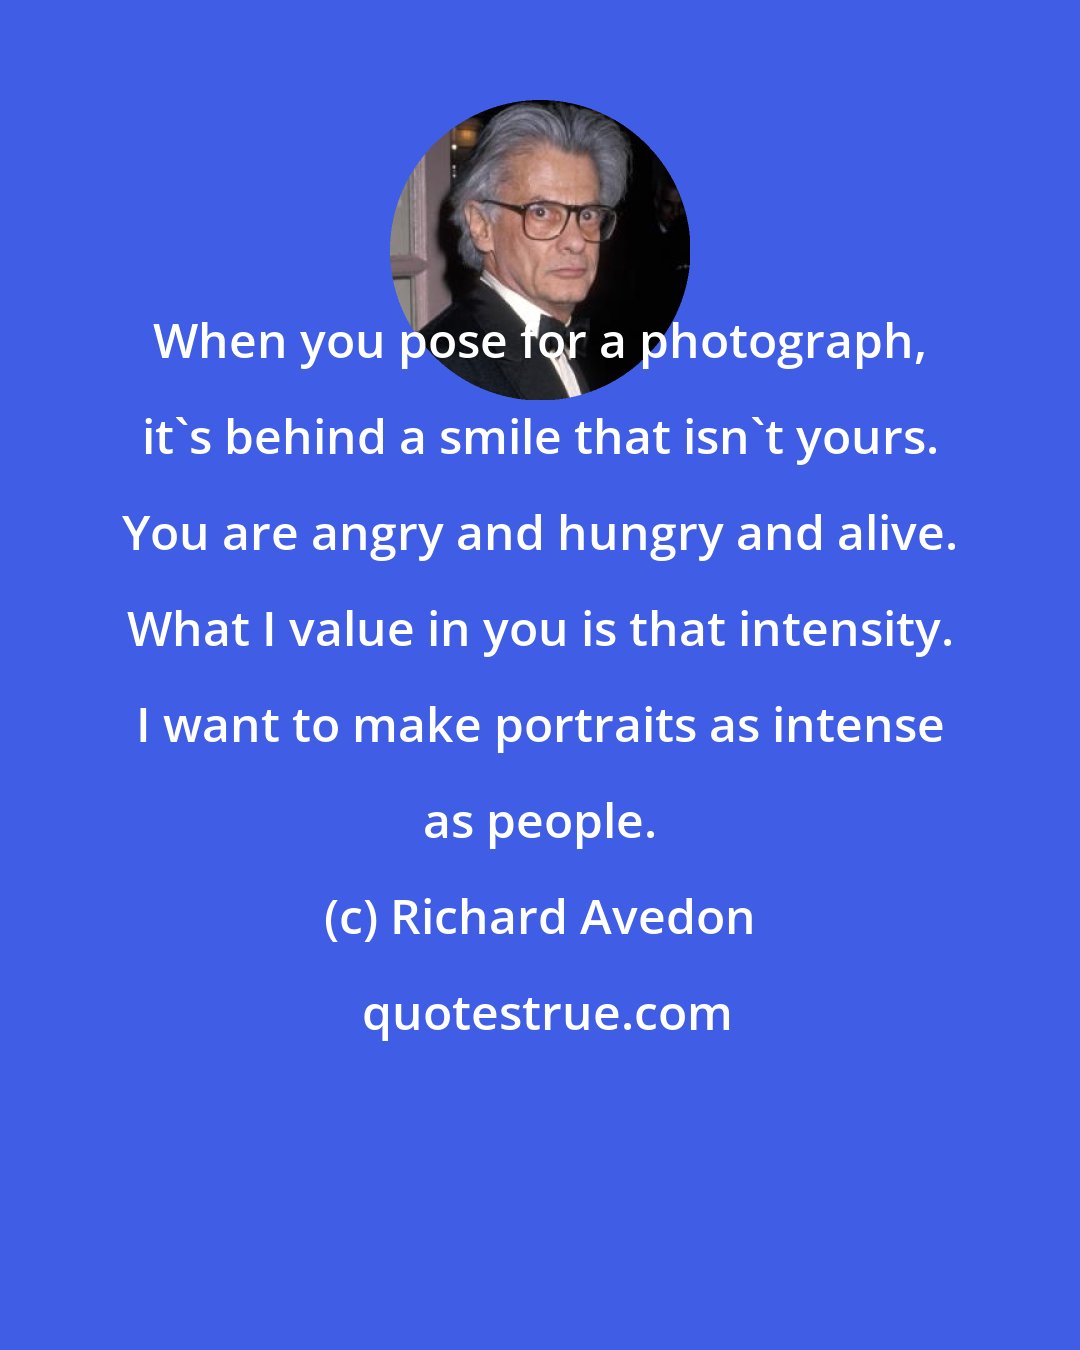 Richard Avedon: When you pose for a photograph, it's behind a smile that isn't yours. You are angry and hungry and alive. What I value in you is that intensity. I want to make portraits as intense as people.